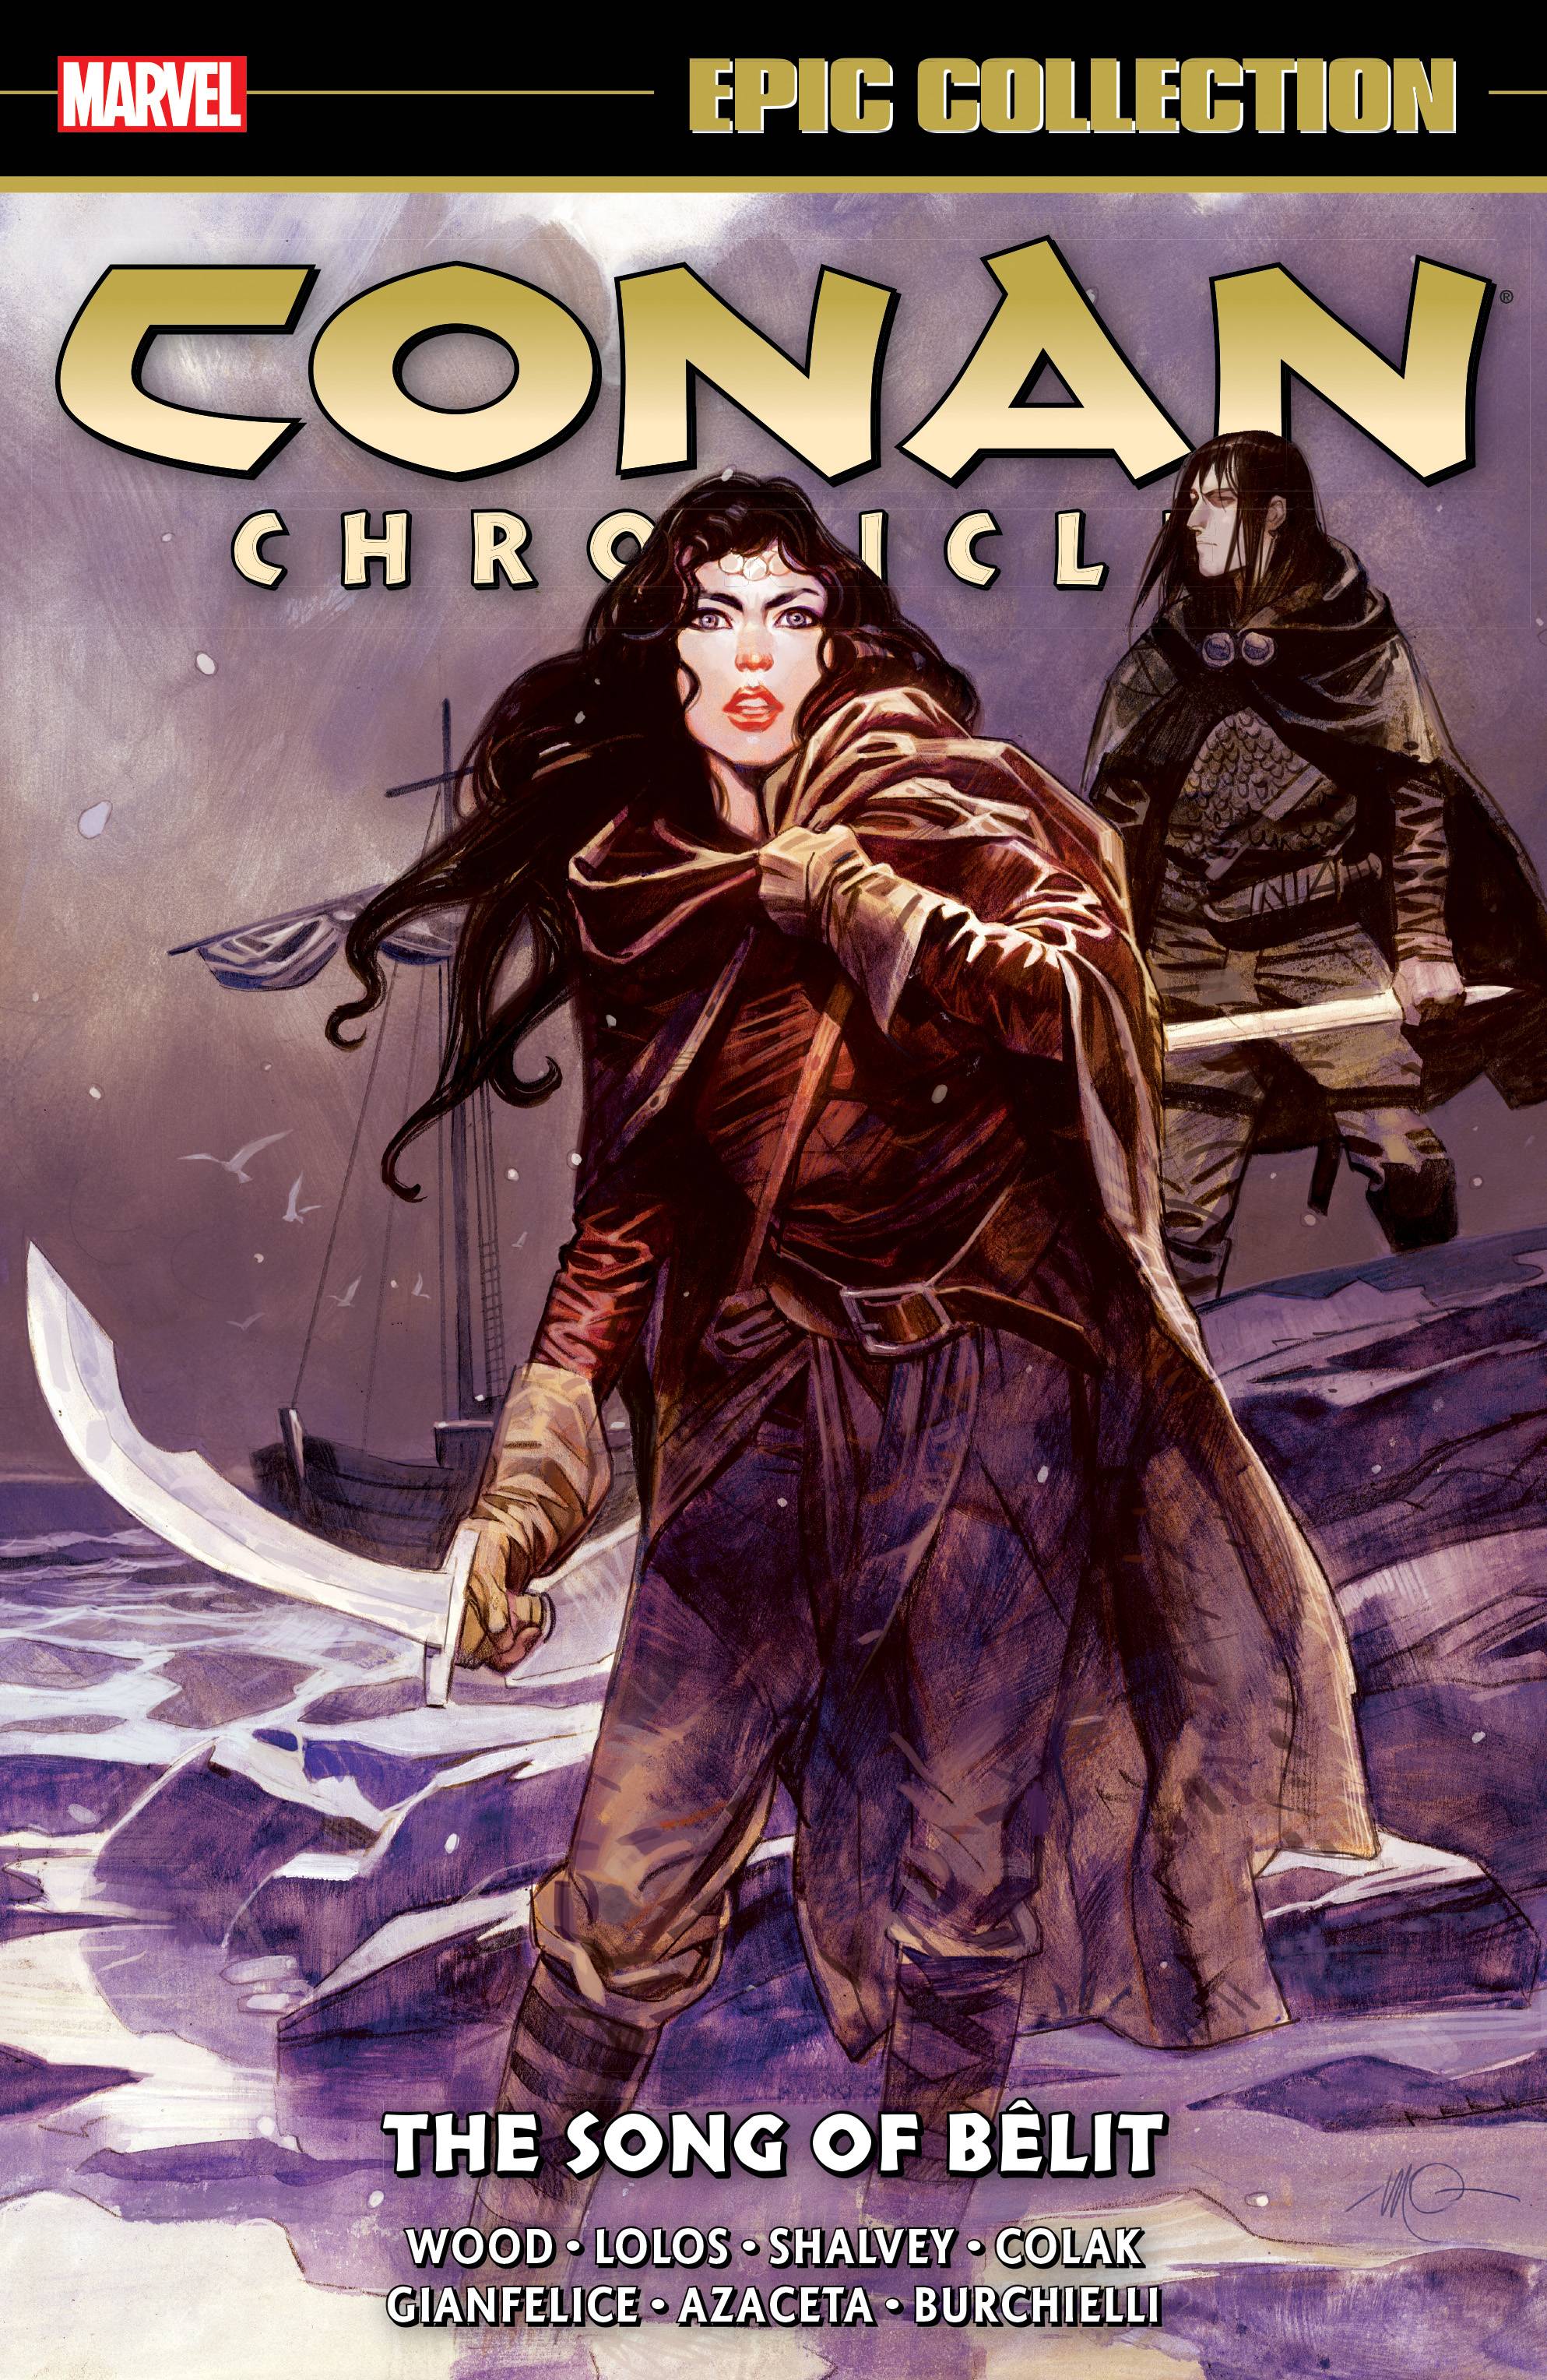 Conan Chronicles Epic Collection Graphic Novel Volume 6 Song of Belit